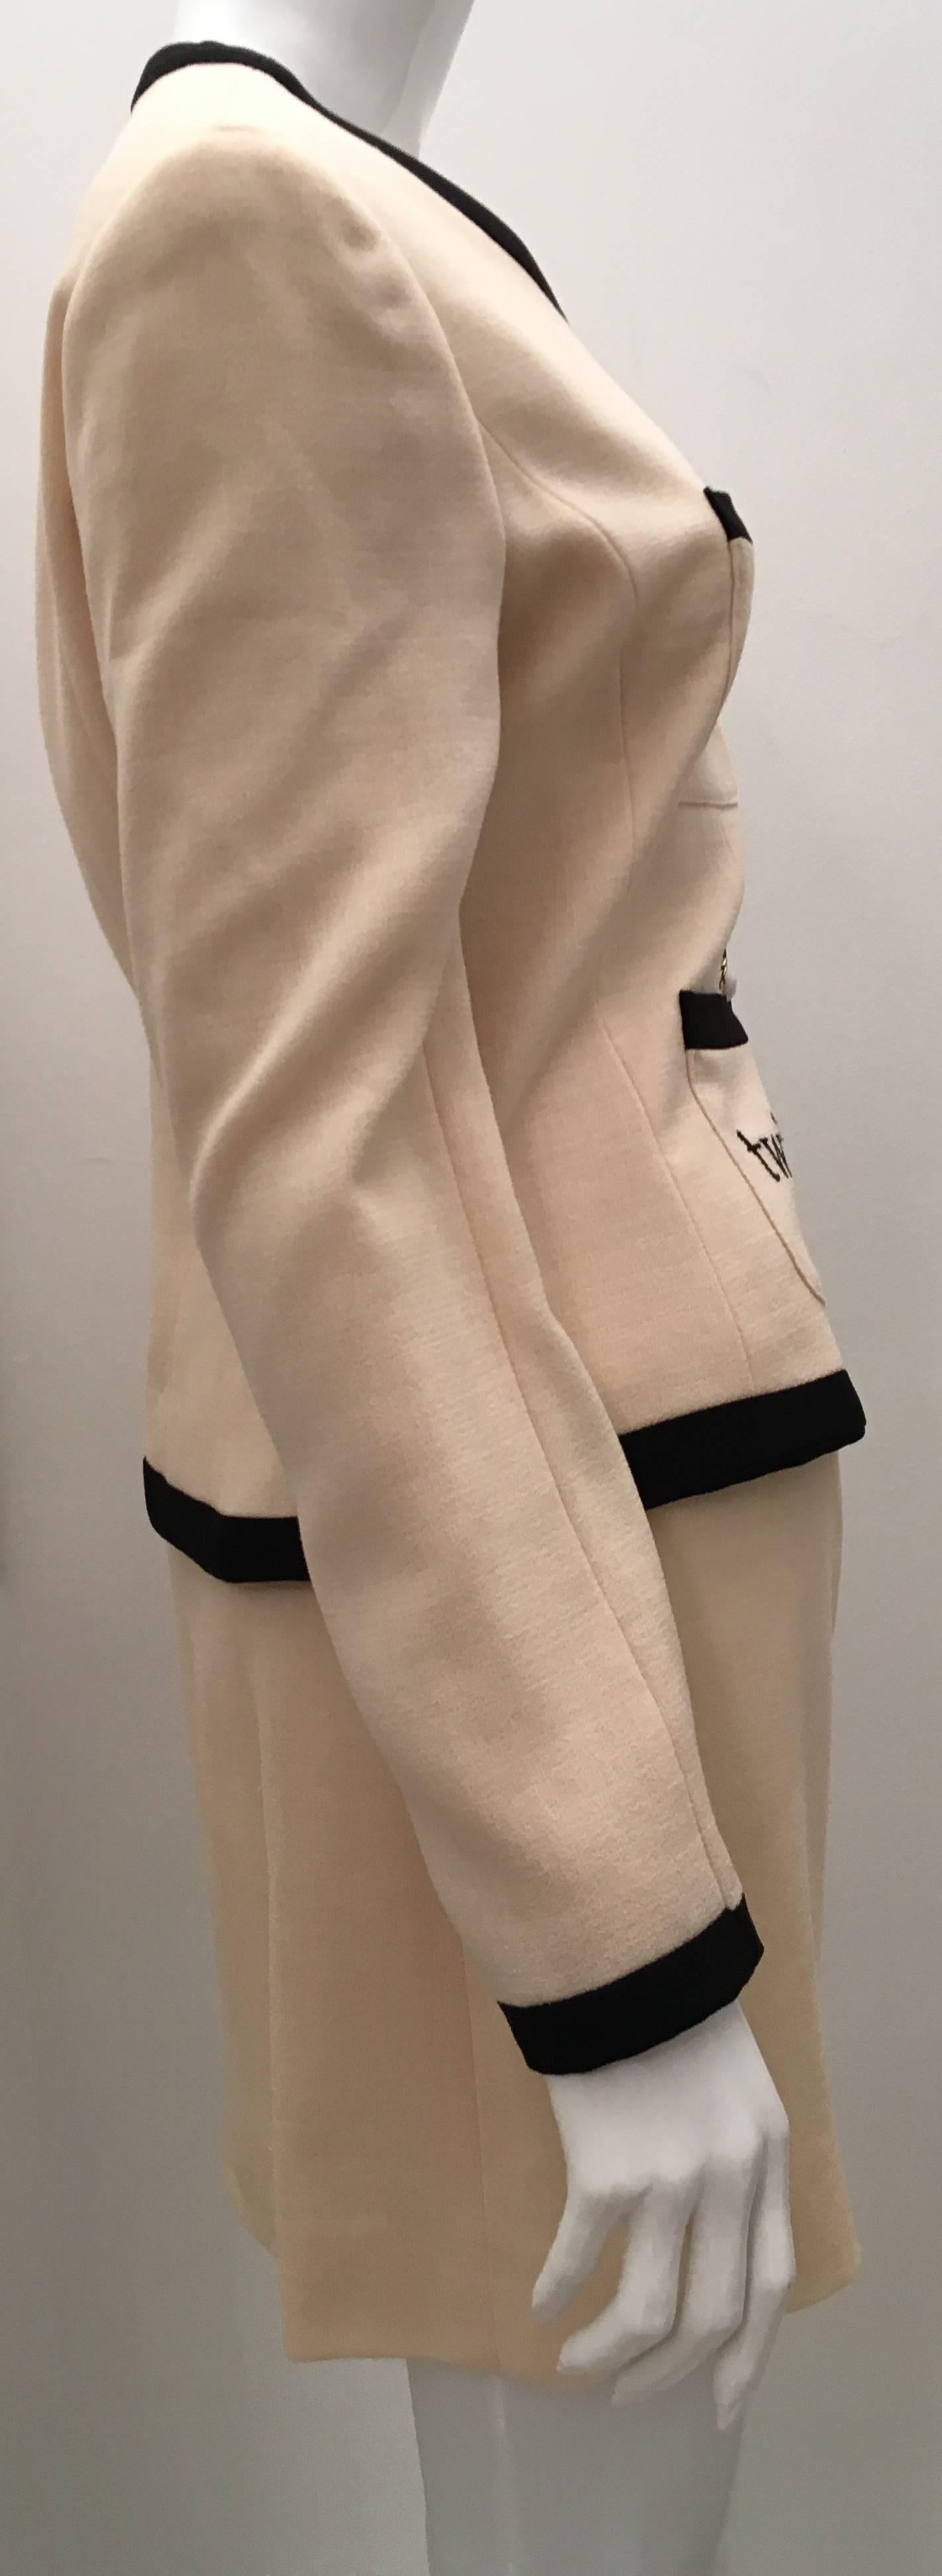 Presented here is a beautiful 2 piece beige suit from Moschino. The suit is from the 'Moschino Cheap and Chic' line. The jacket is a size 42 Italian, a size 38 French, a size 10 Great Britain, and a size 8 USA. The skirt is also a size 42 Italian, a